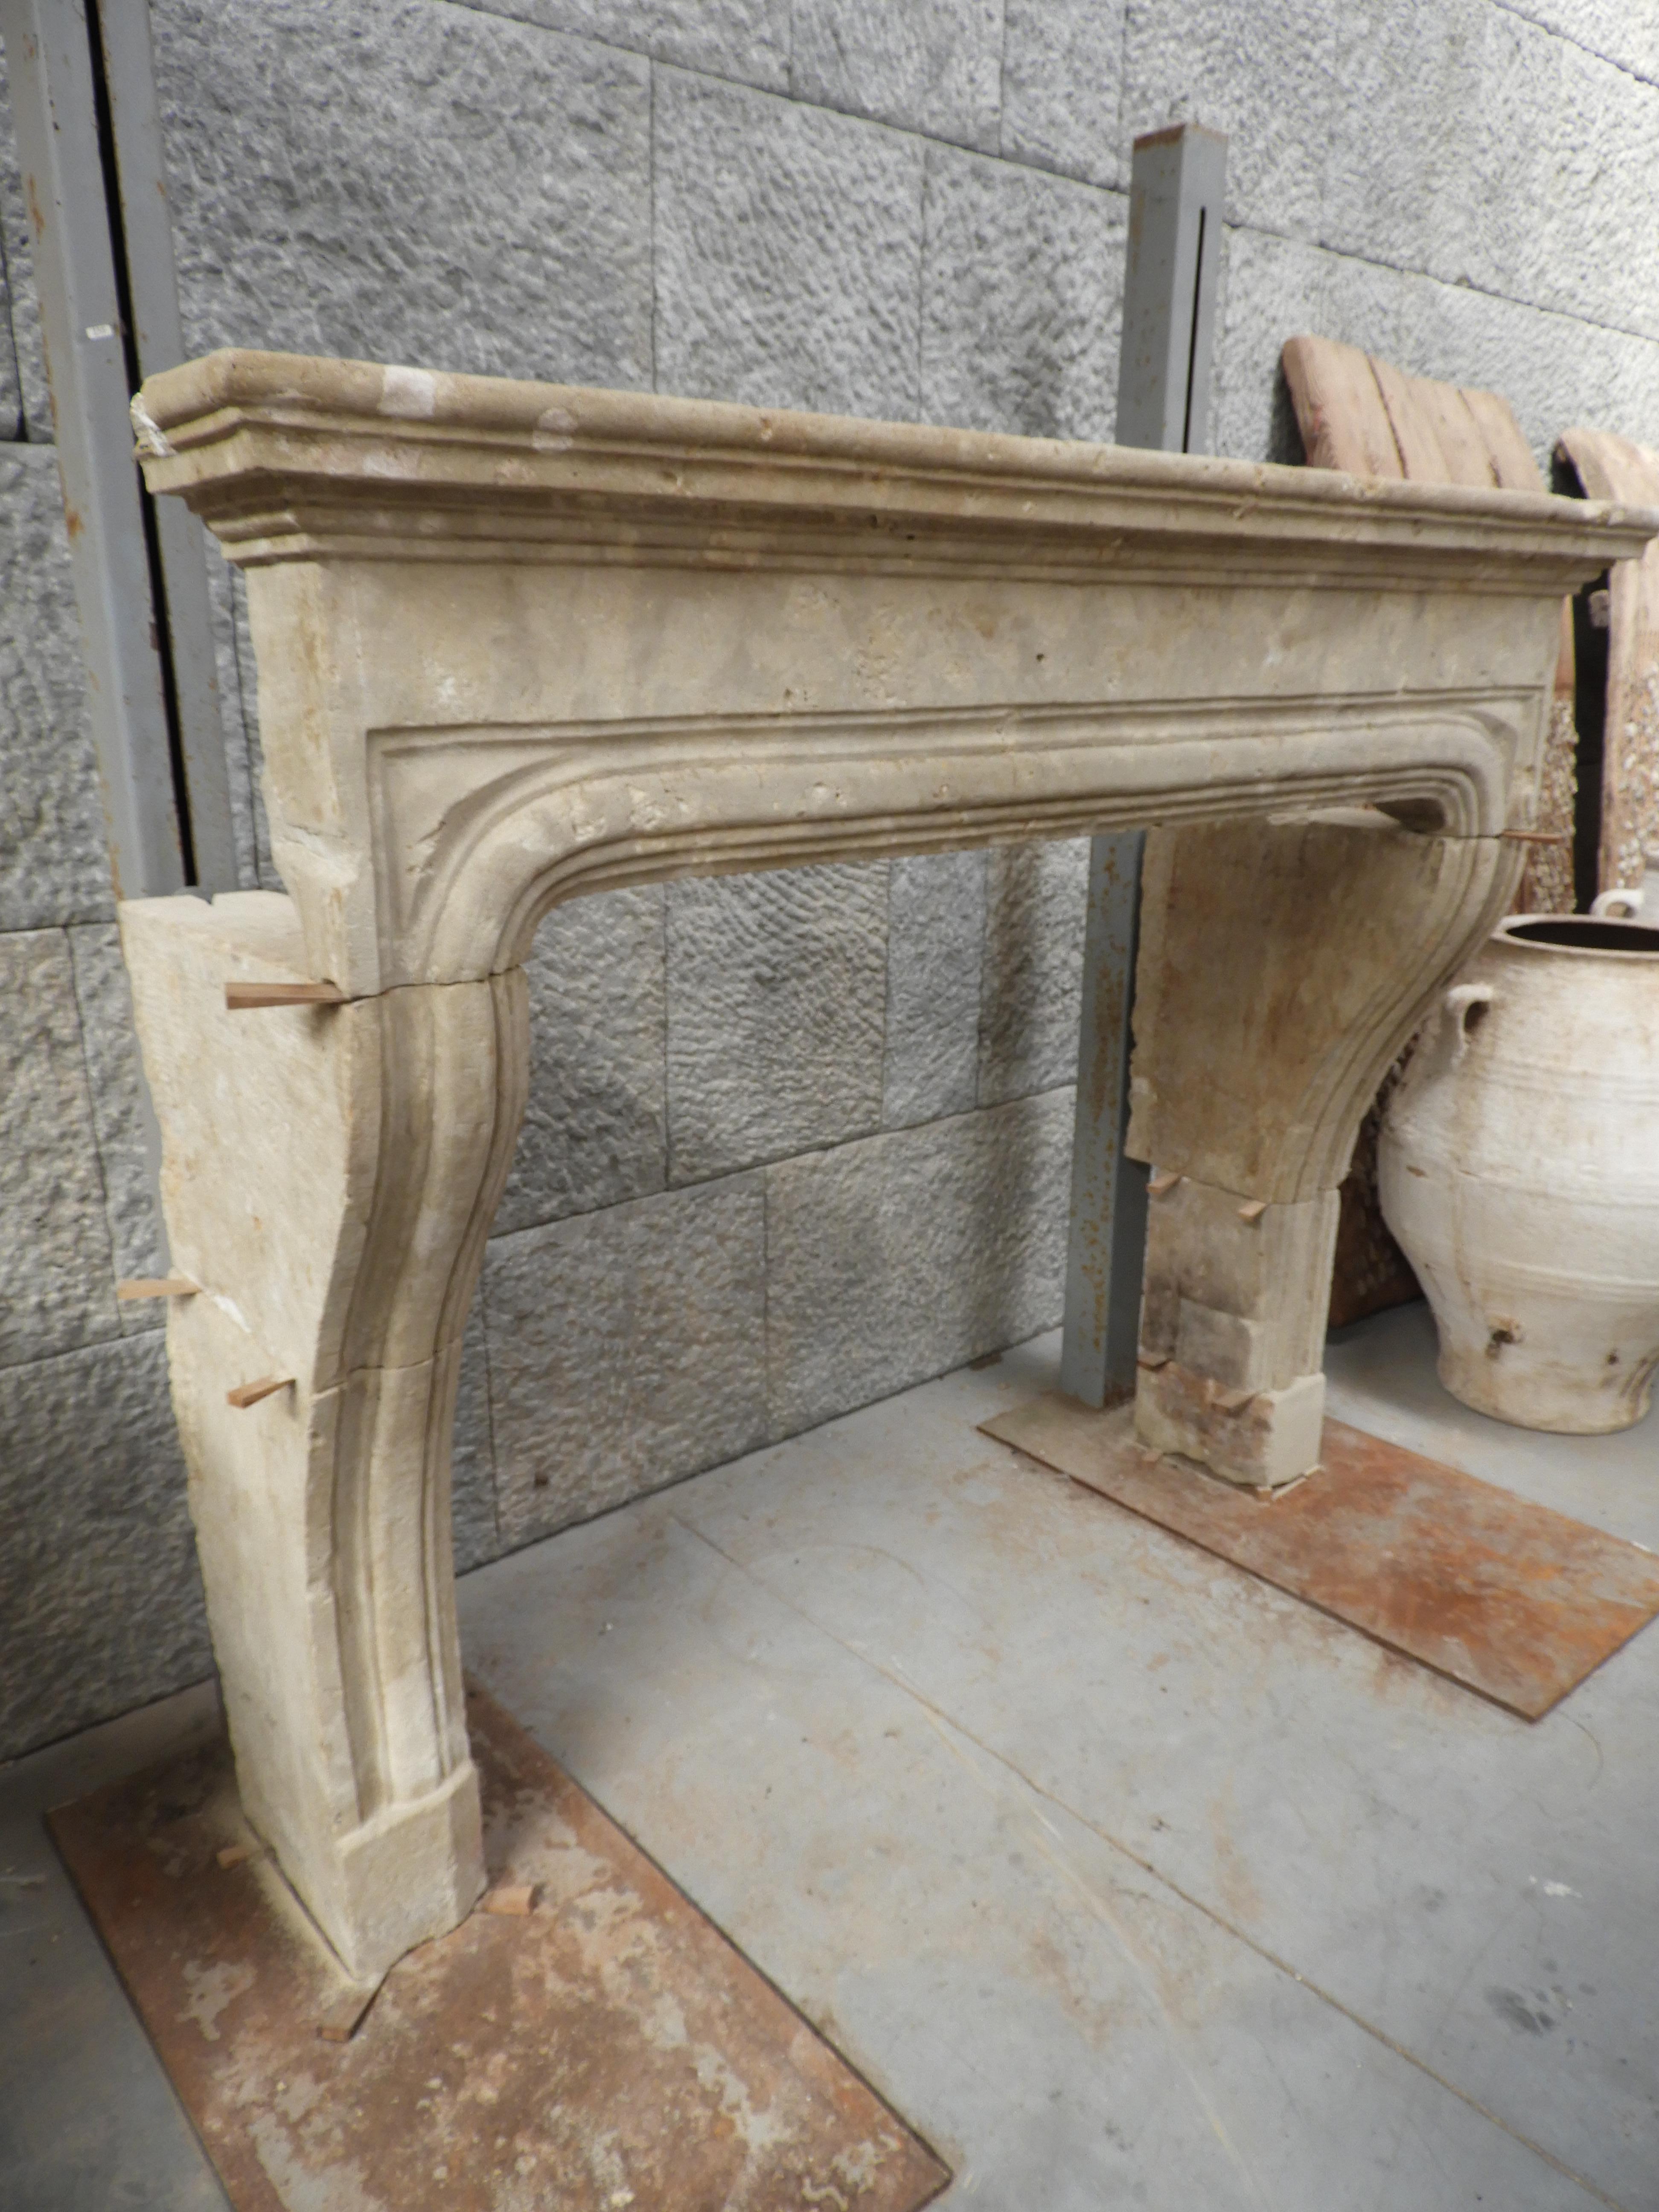 17th century French sandstone fireplace, nice warn patina, its already partially restored, the paint has been taken of by hand not to damage the surface of the stone so it keeps it's character. Really nice fireplace that has seen a lot of history.